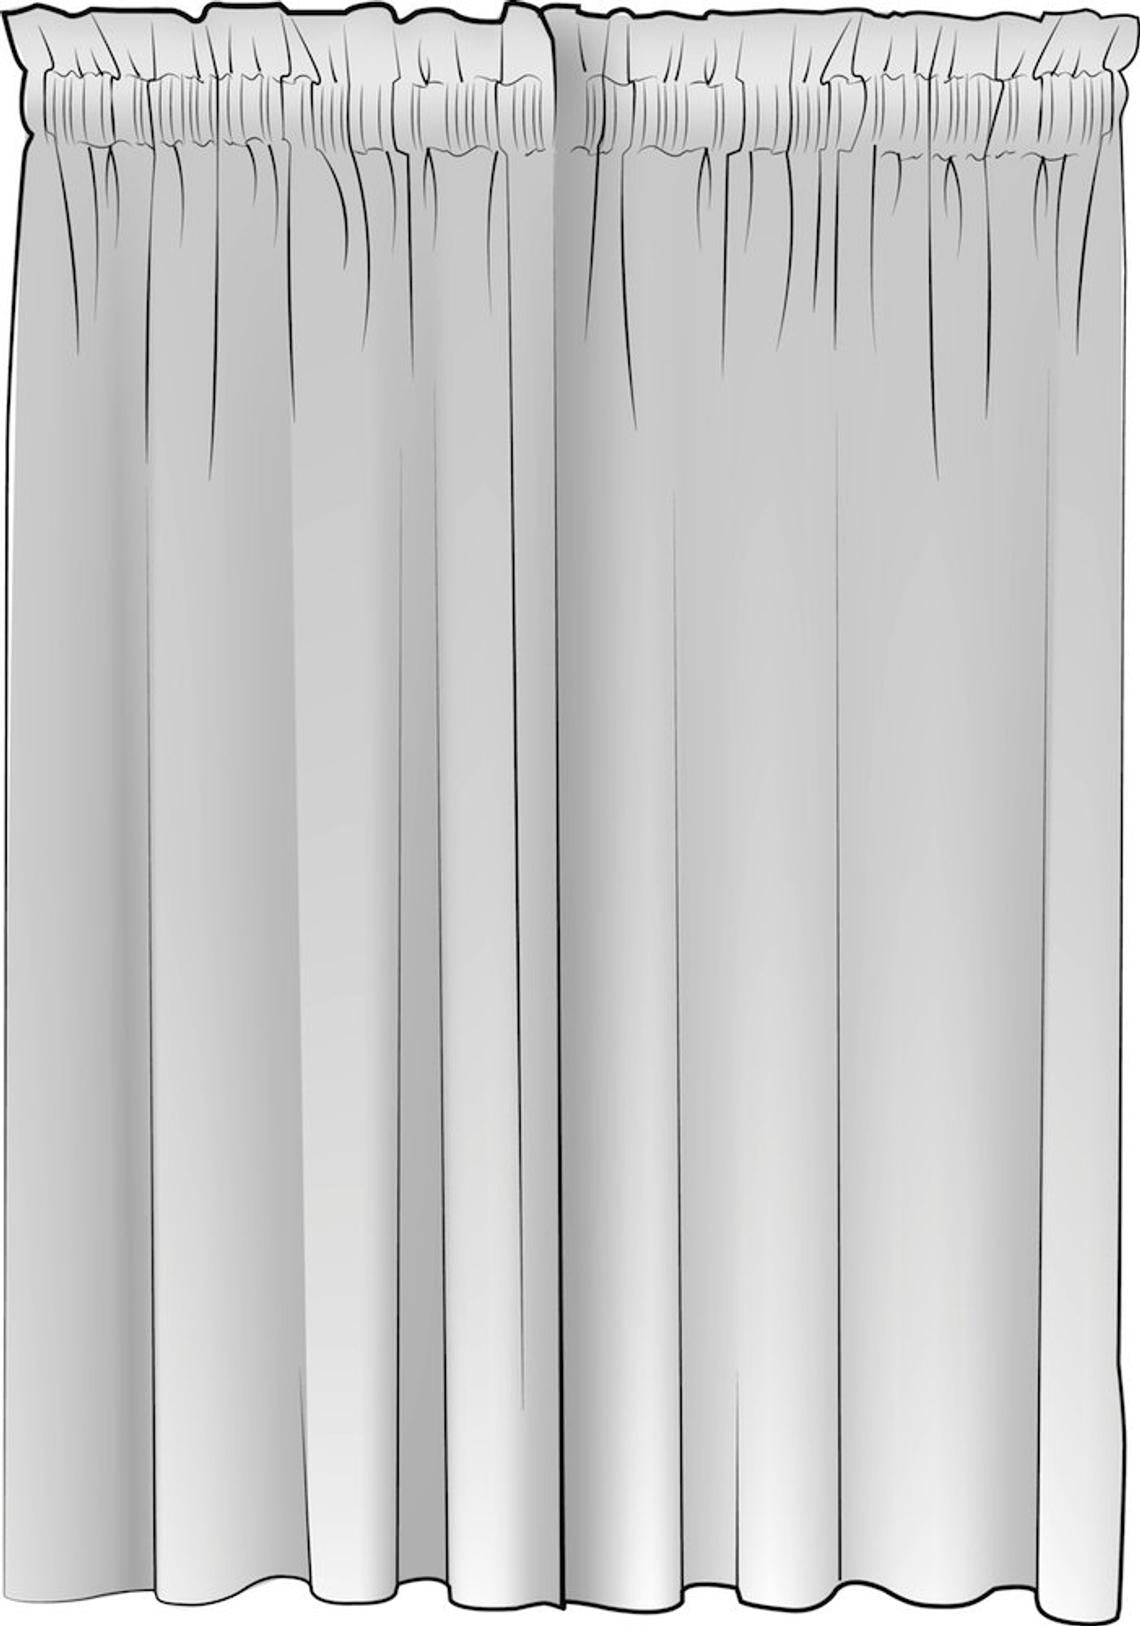 rod pocket curtain panels pair in classic black ticking stripe on white